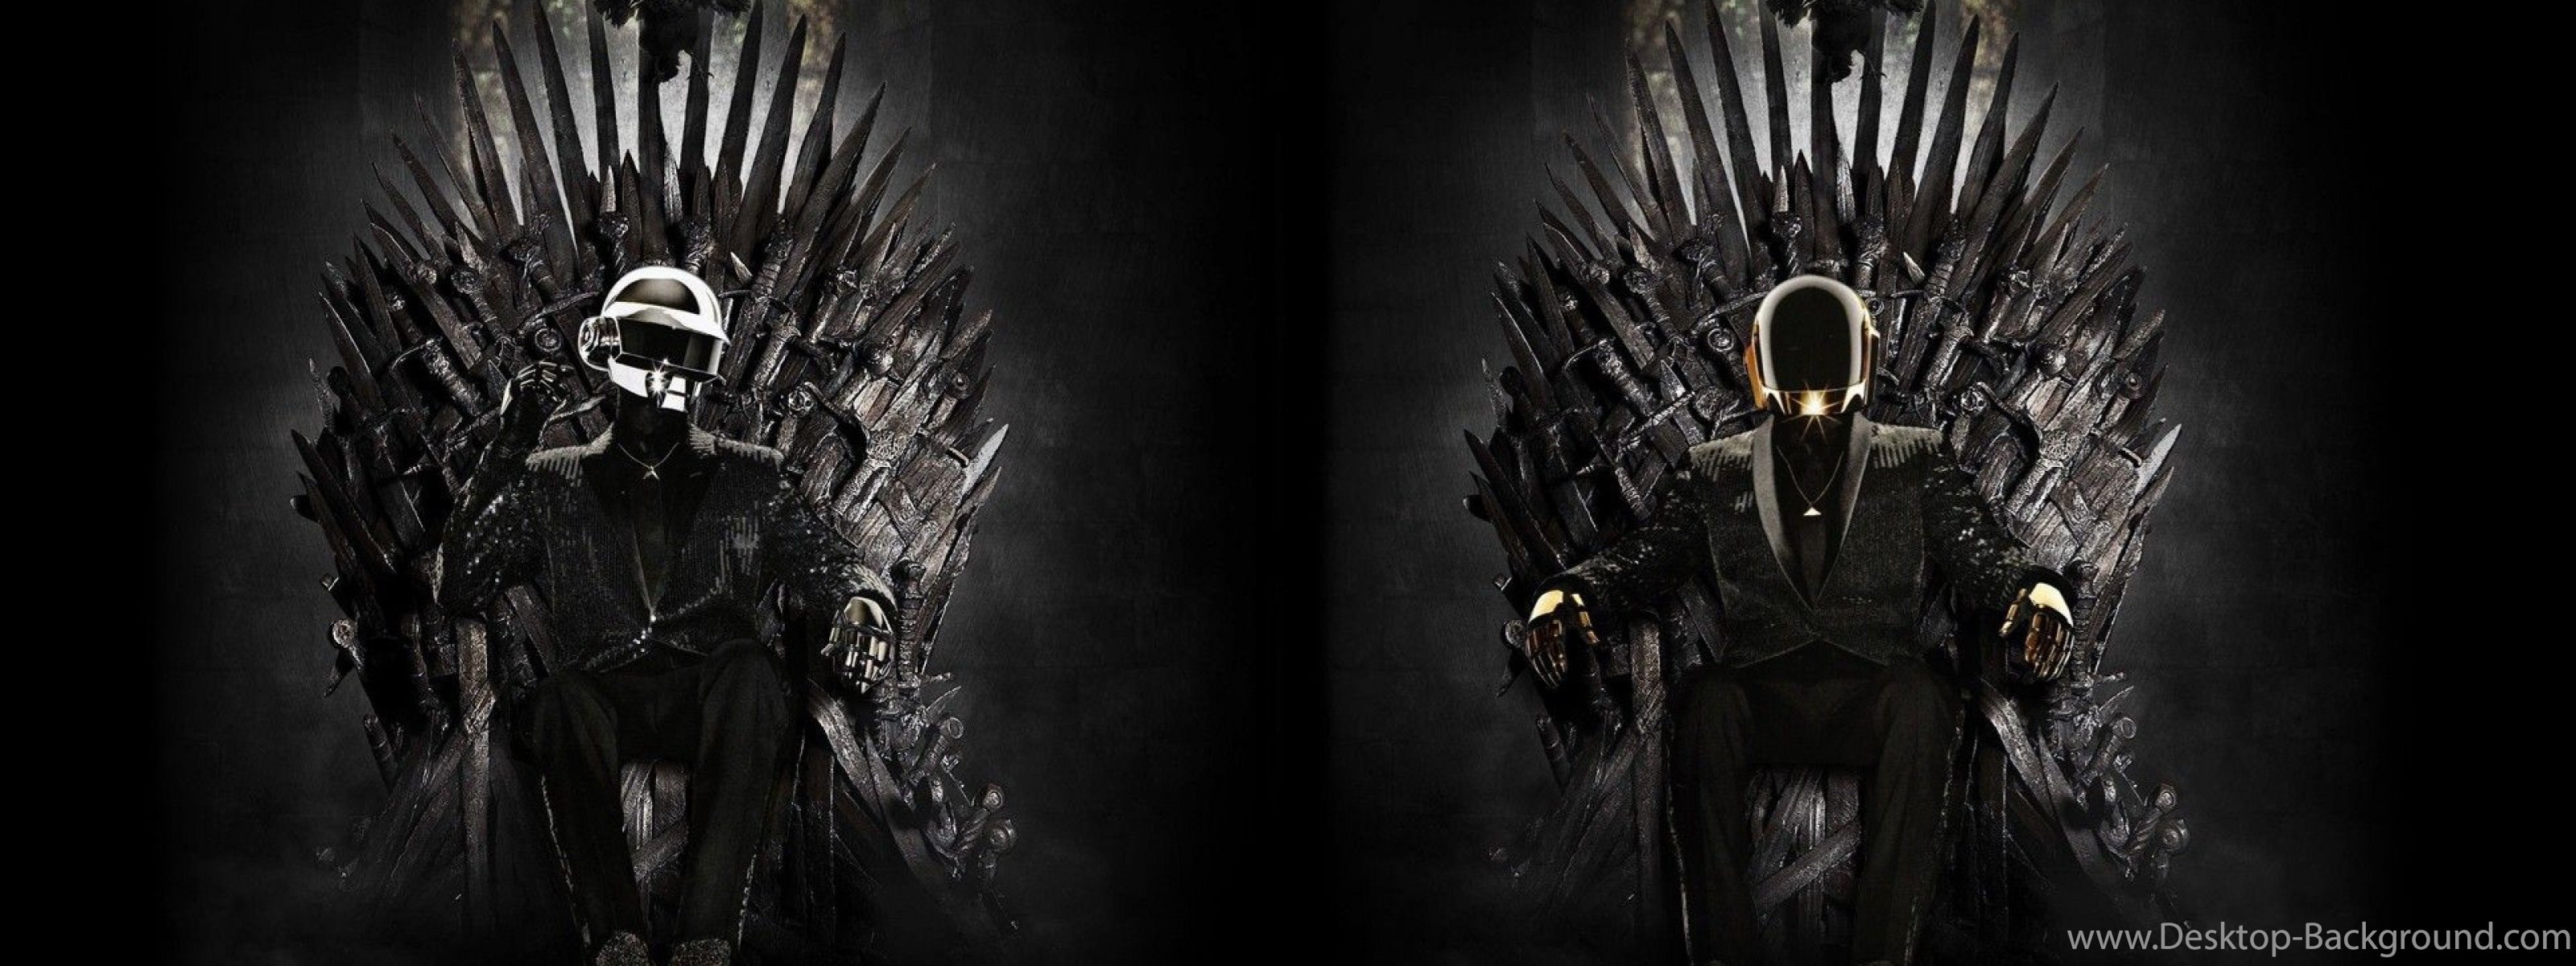 3200x1200 Best 10 GAME OF THRONES 3 MONITOR WALLPAPER Pictures Image .